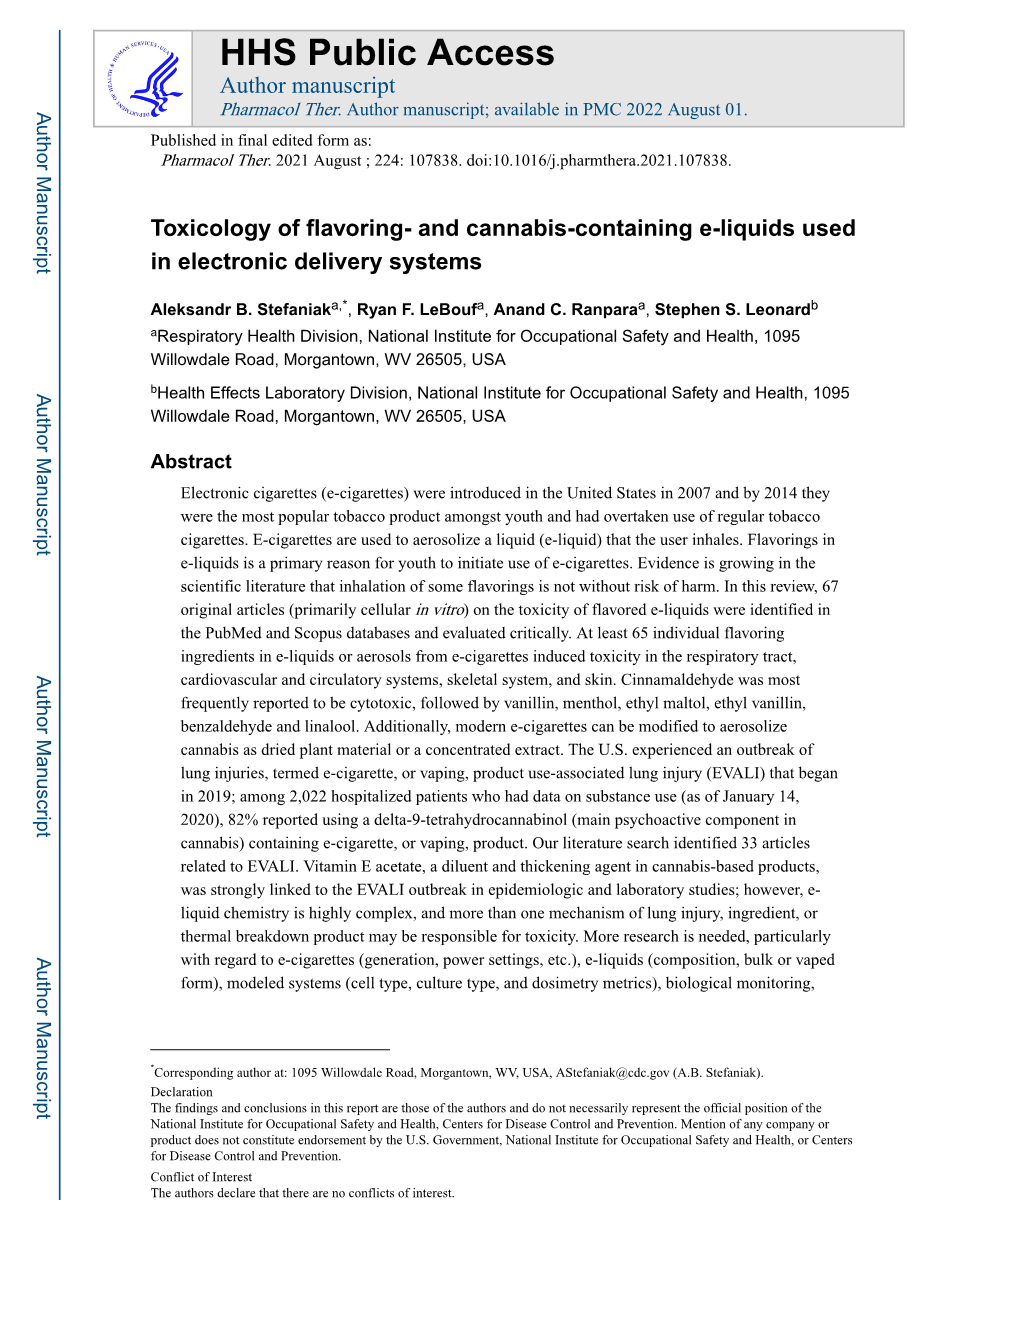 Toxicology of Flavoring- and Cannabis-Containing E-Liquids Used in Electronic Delivery Systems